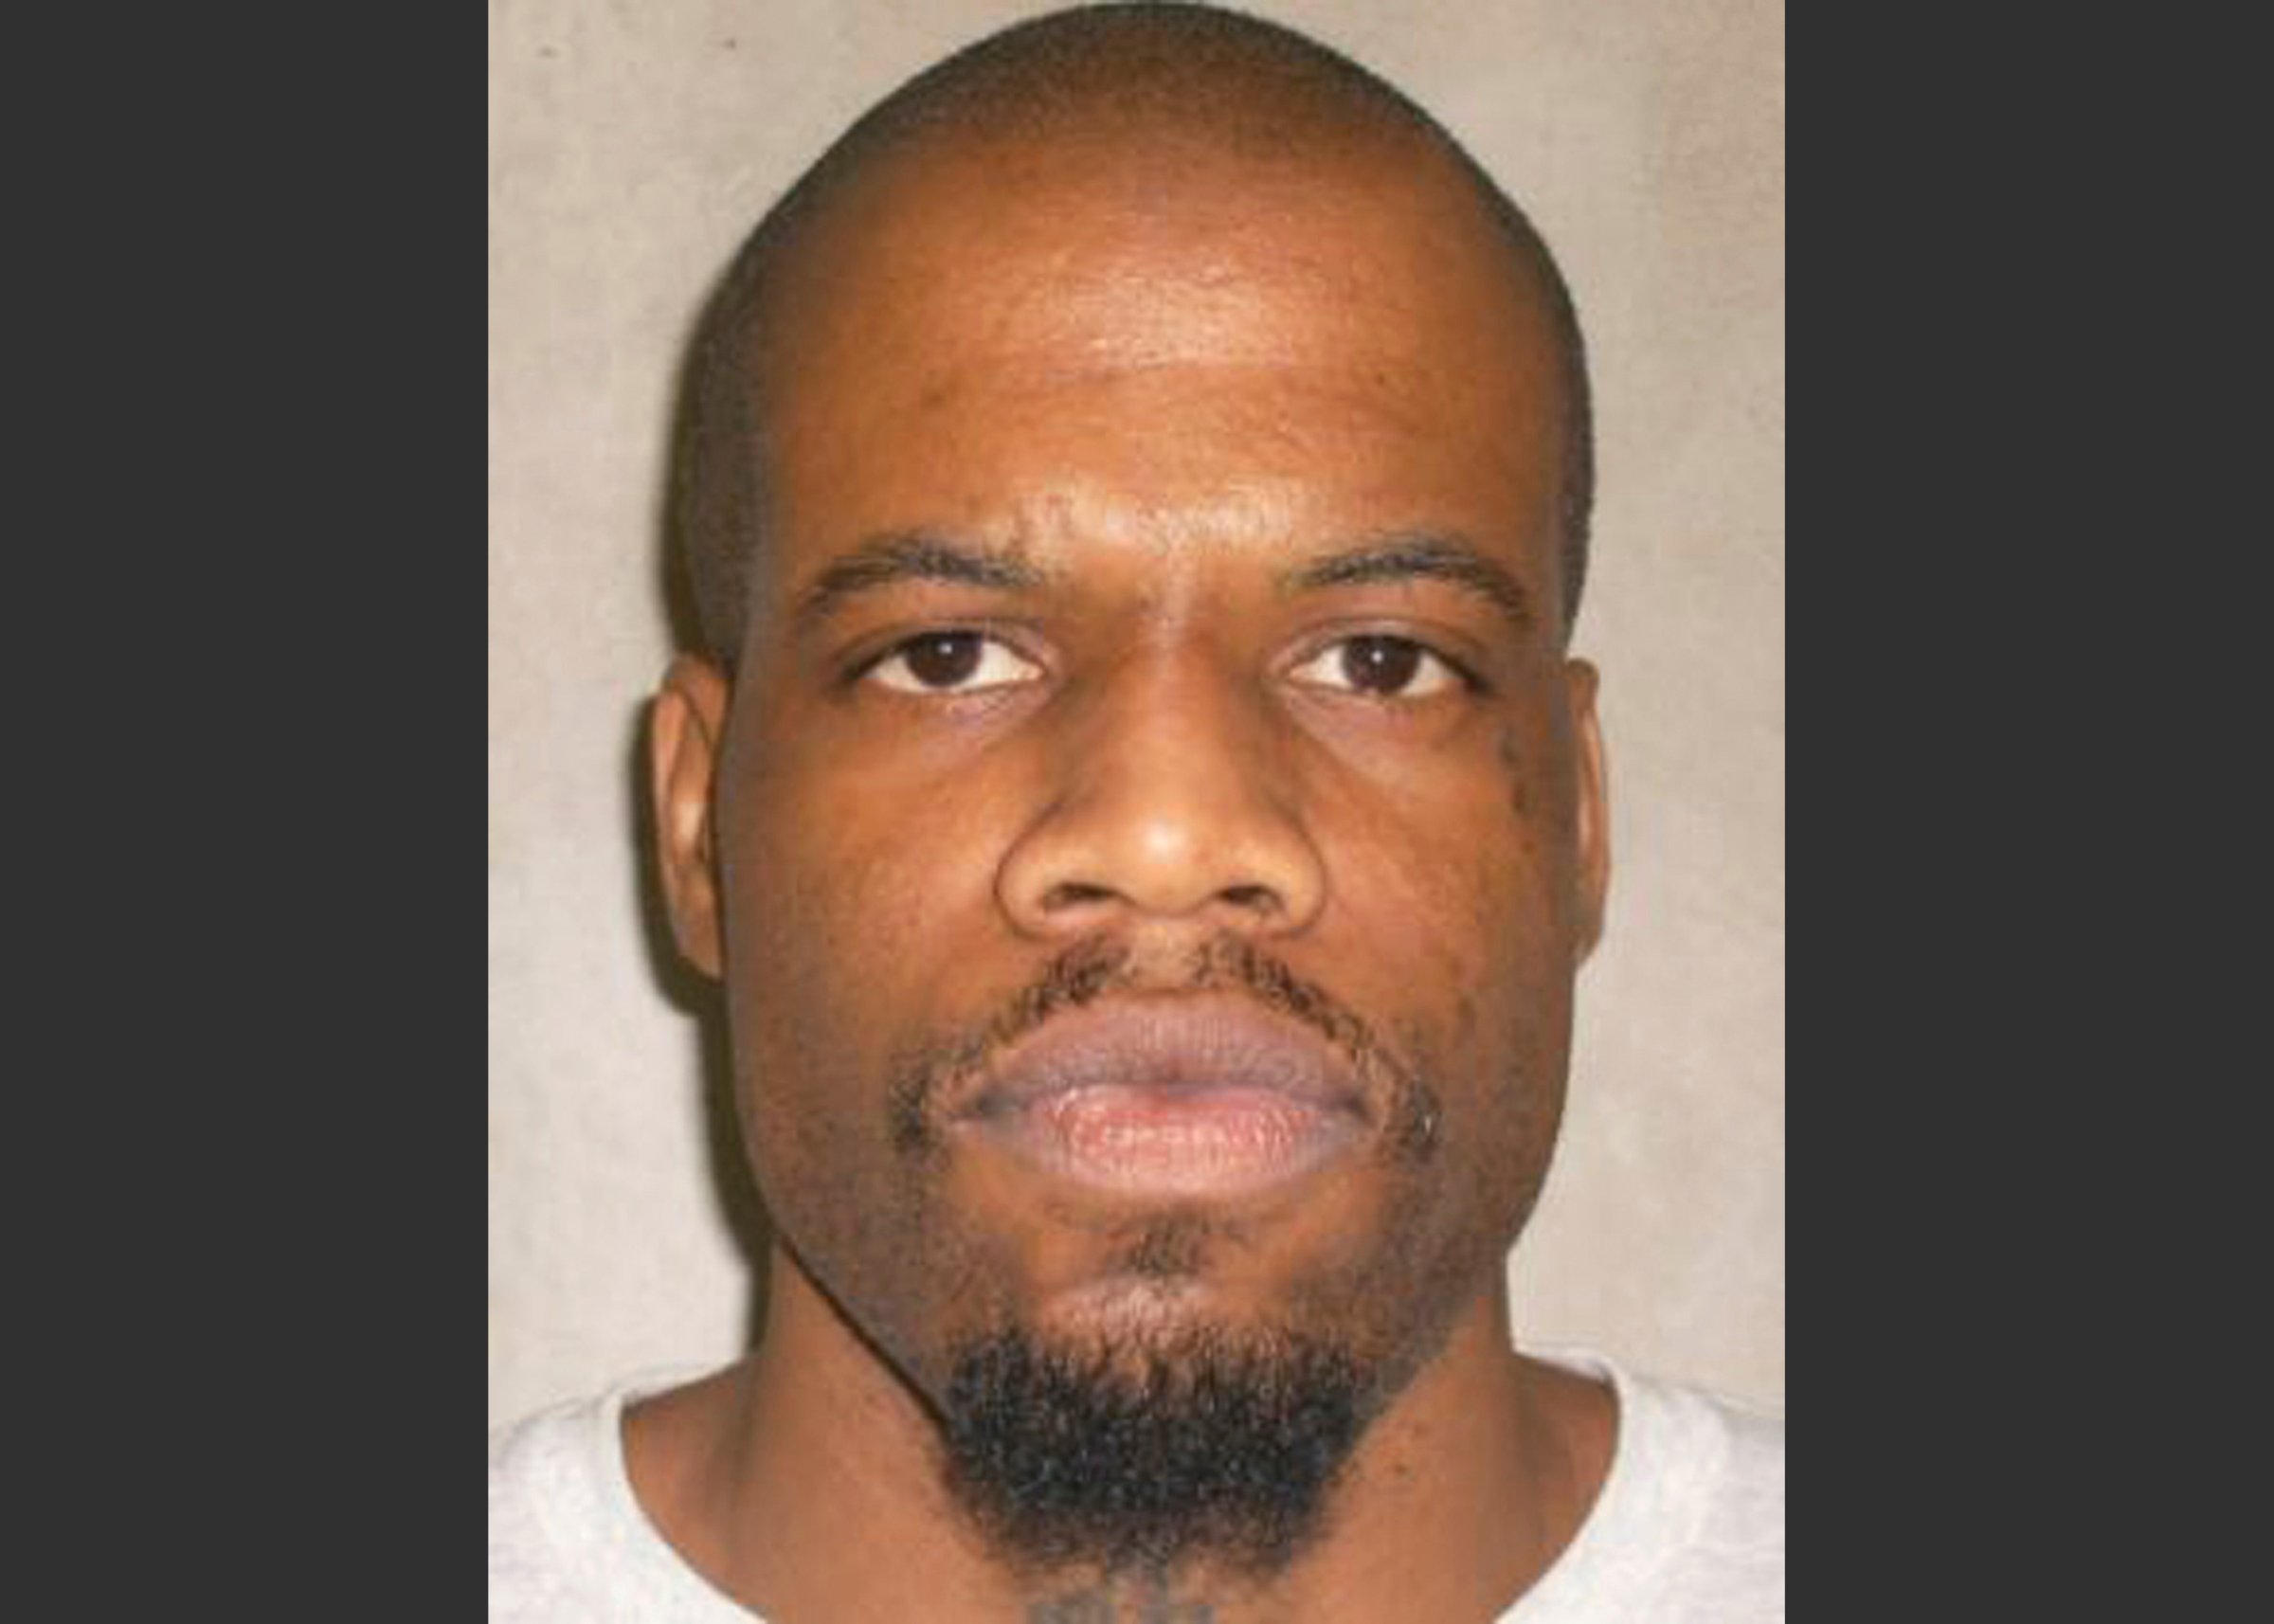 Clayton Lockett, who was scheduled to be executed on March 20, 2014 in the 1999 shooting death of Stephanie Nieman.